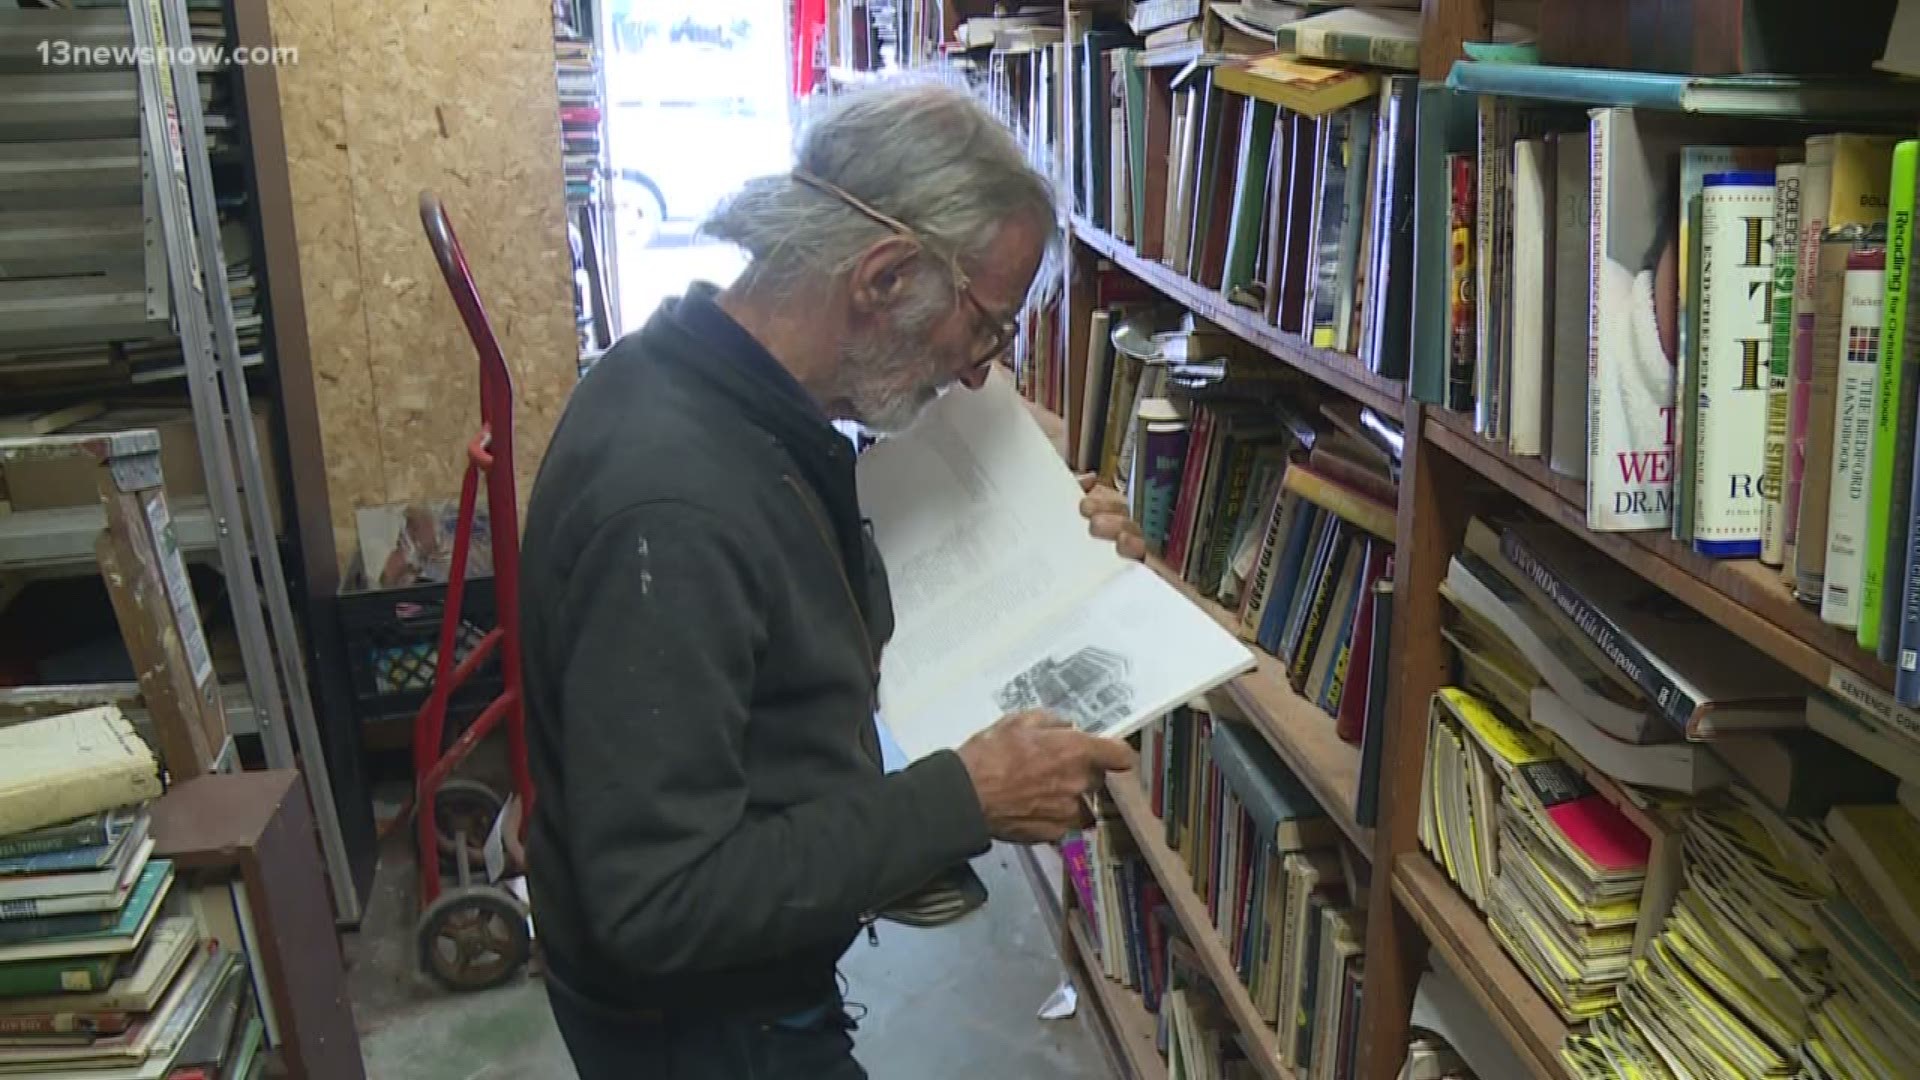 The used book shop isn't organized in any way, but that's exactly how the owner likes it.